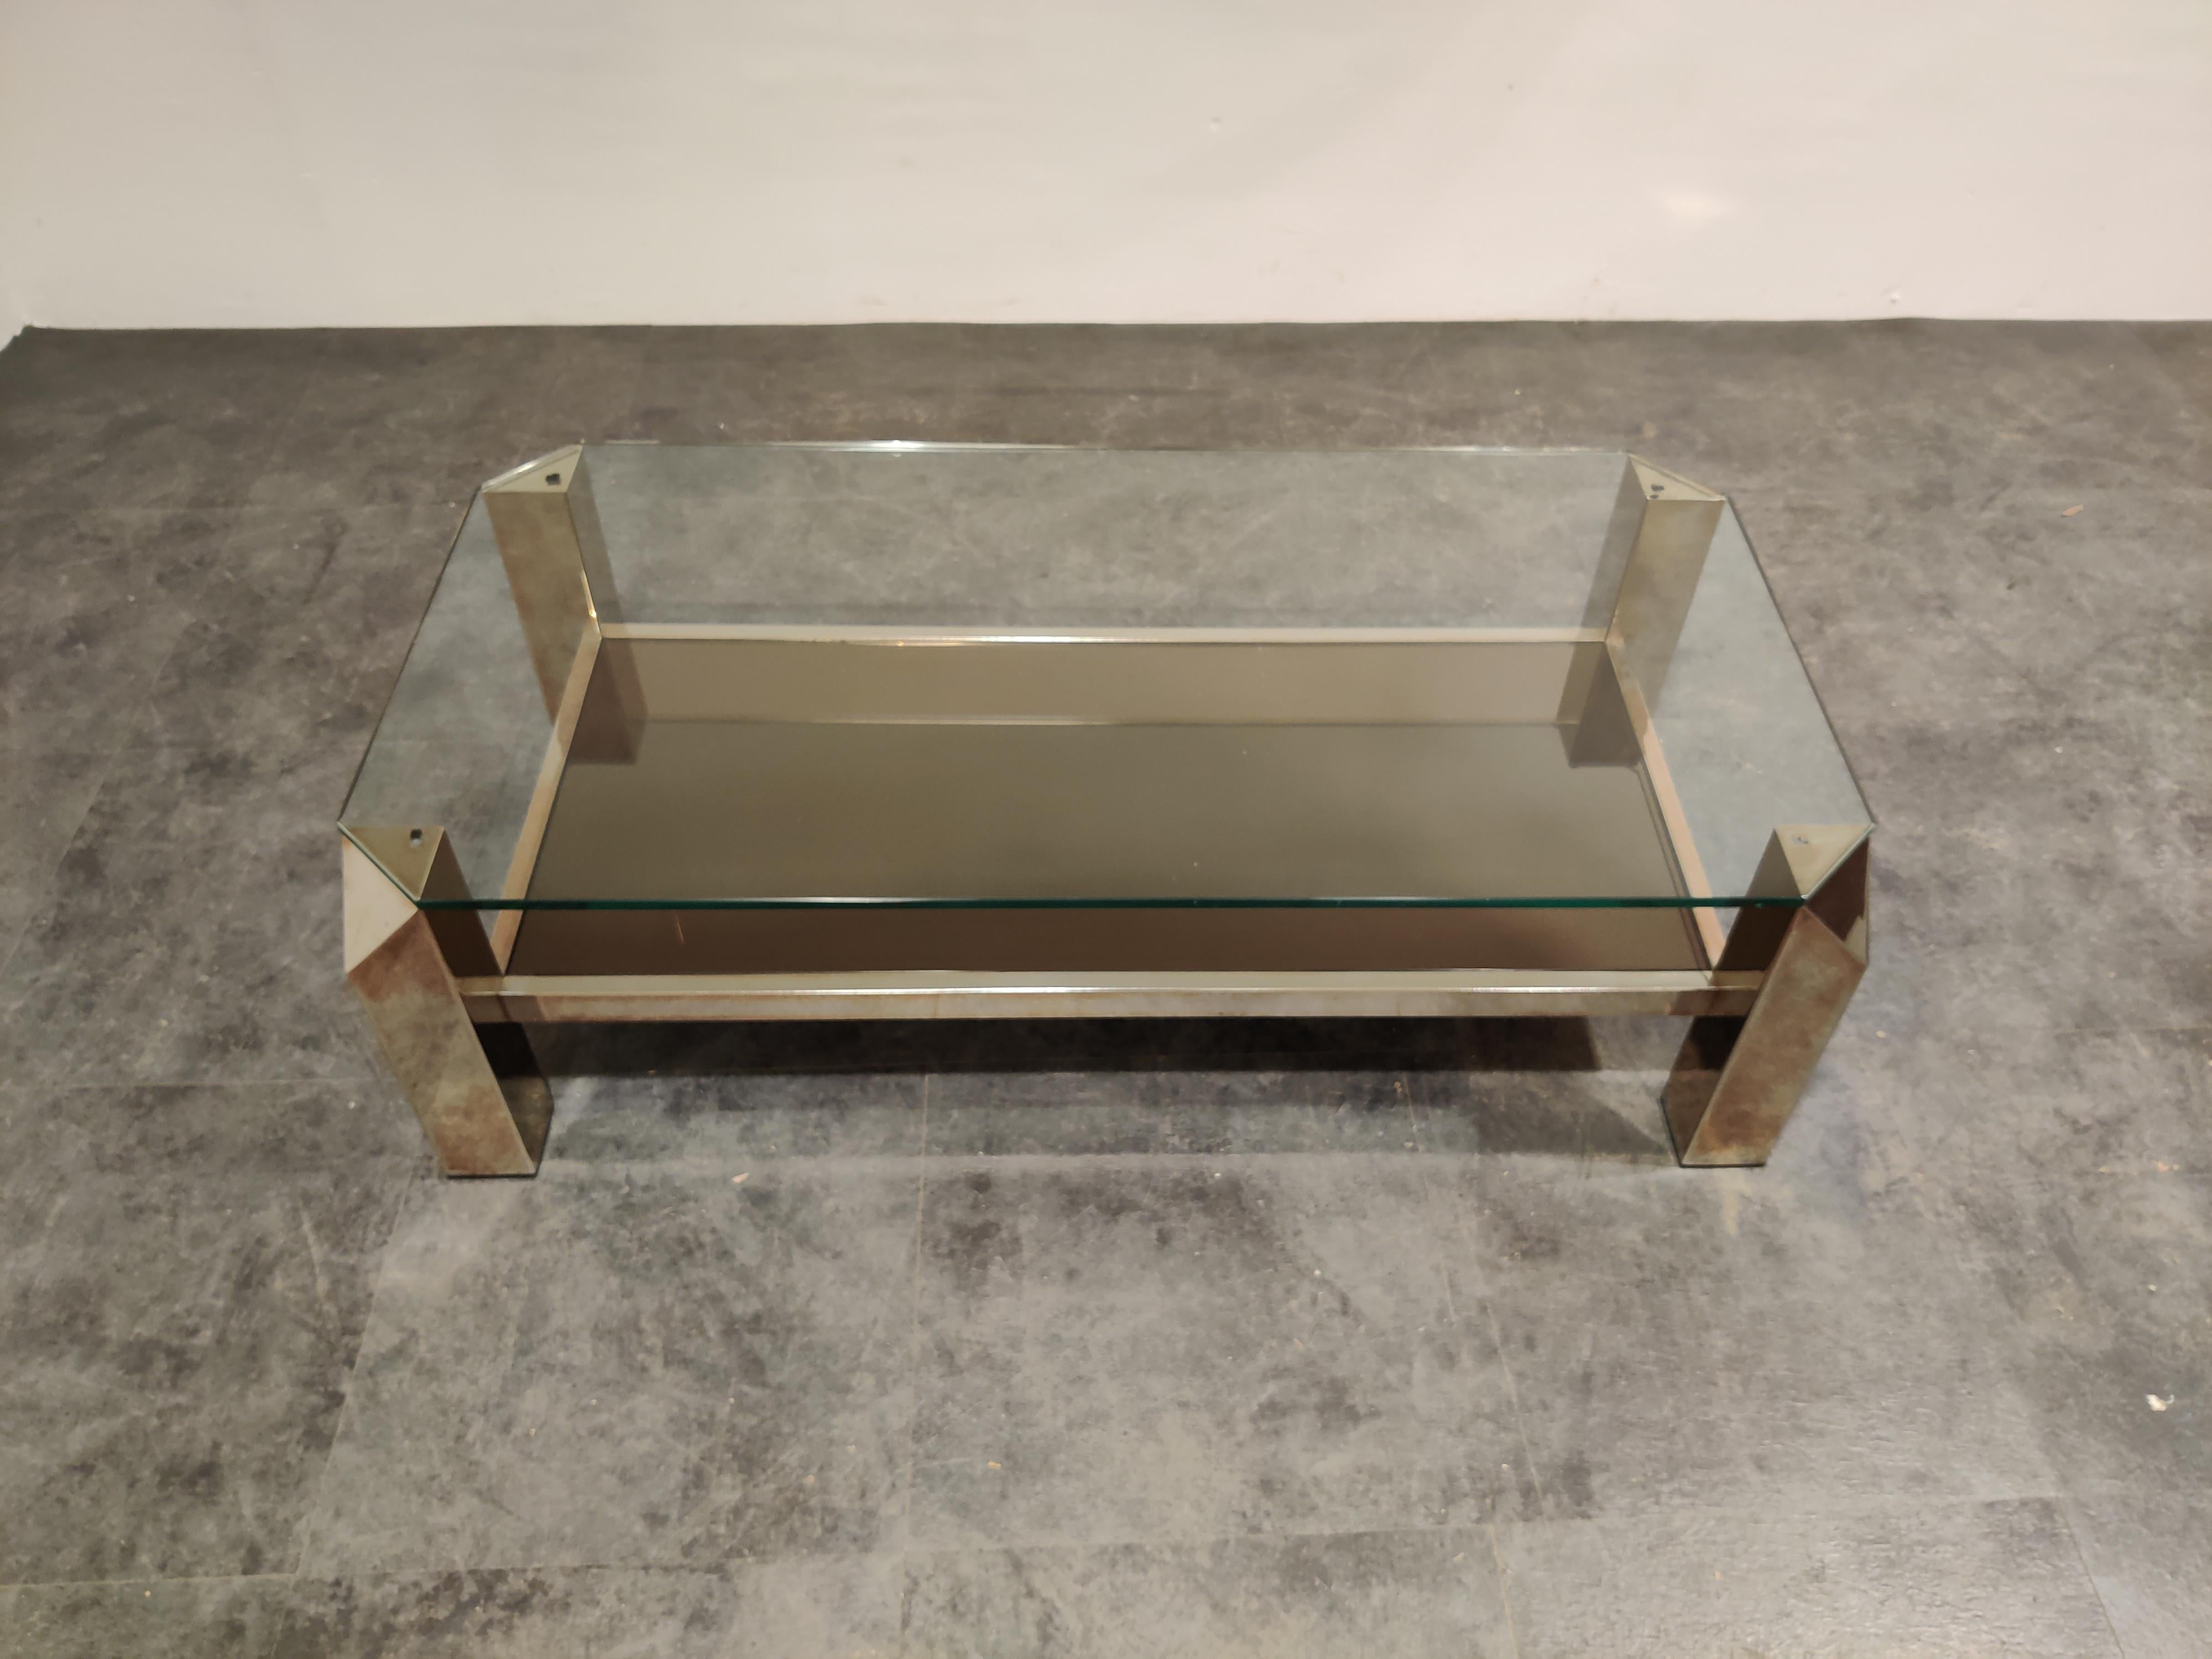 Quality 24-karat gold layered and thick clear glass coffee table manufactured by Belgochrom.

Belgochrom produced quality furniture pieces with a luxurious appeal.

Good condition, some minor fading. 

1970s, Belgium

Dimensions:

Height